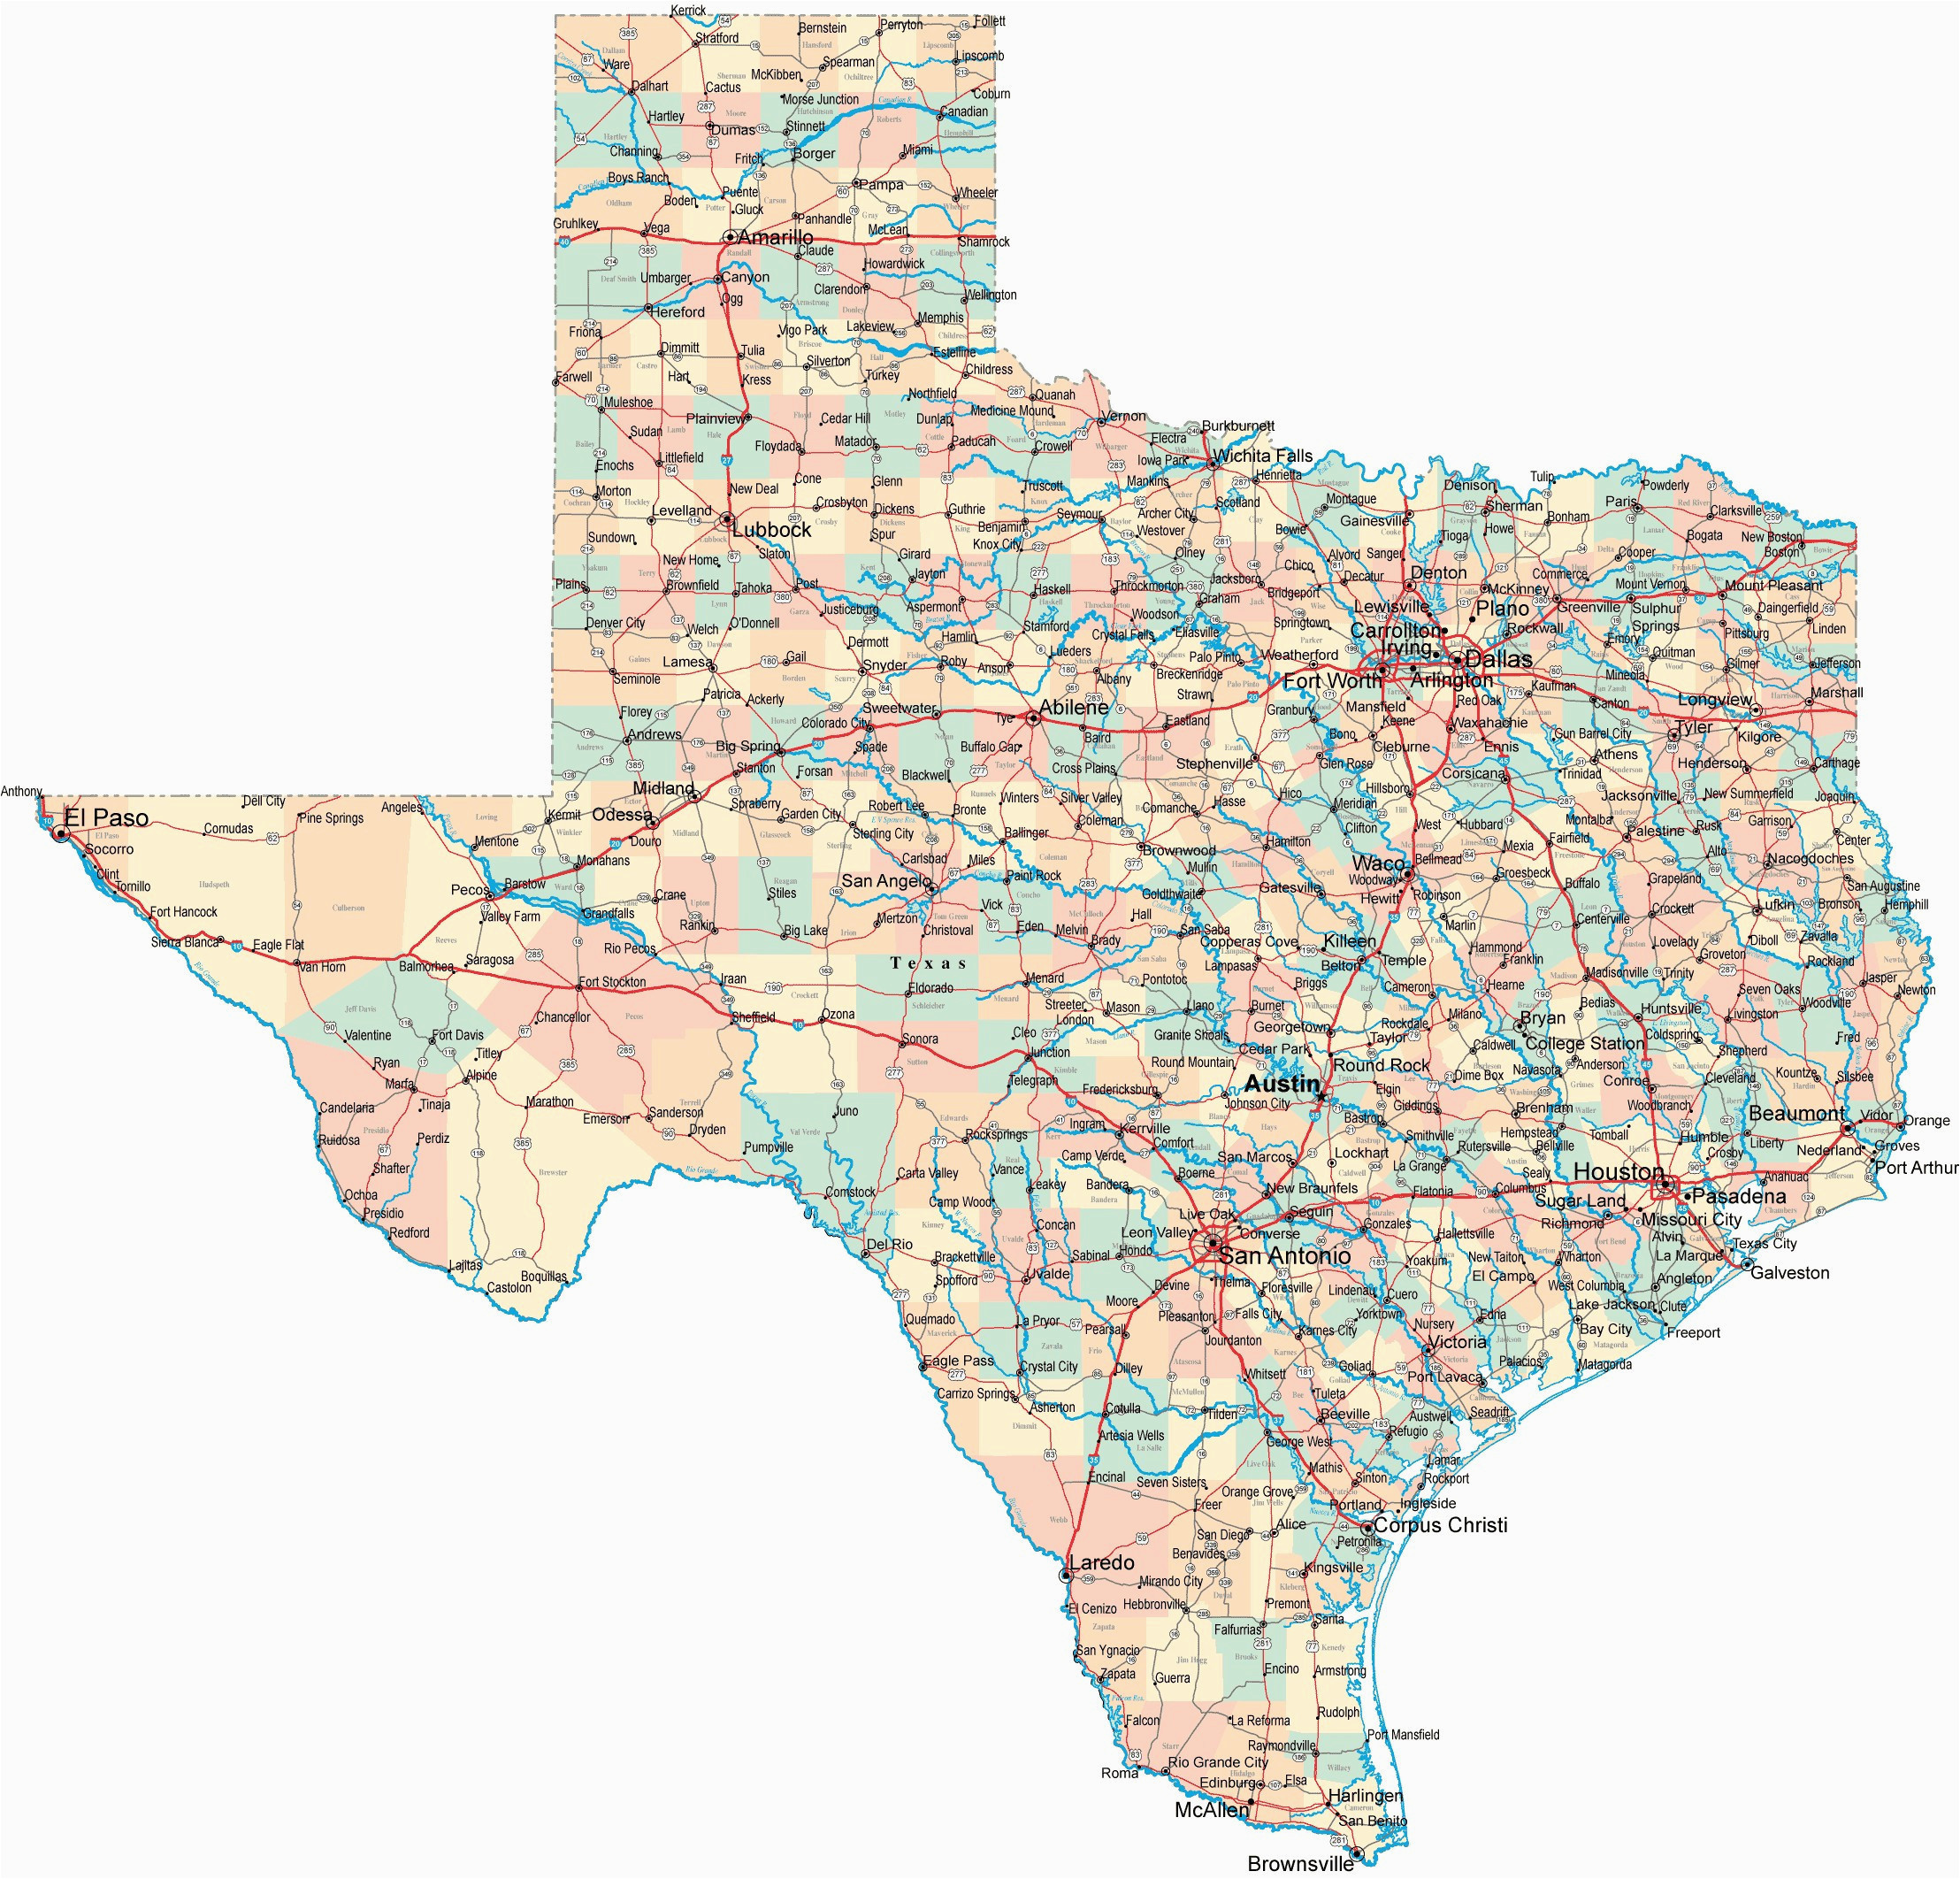 picture of texas on a us map usmaptx1 inspirational map texas